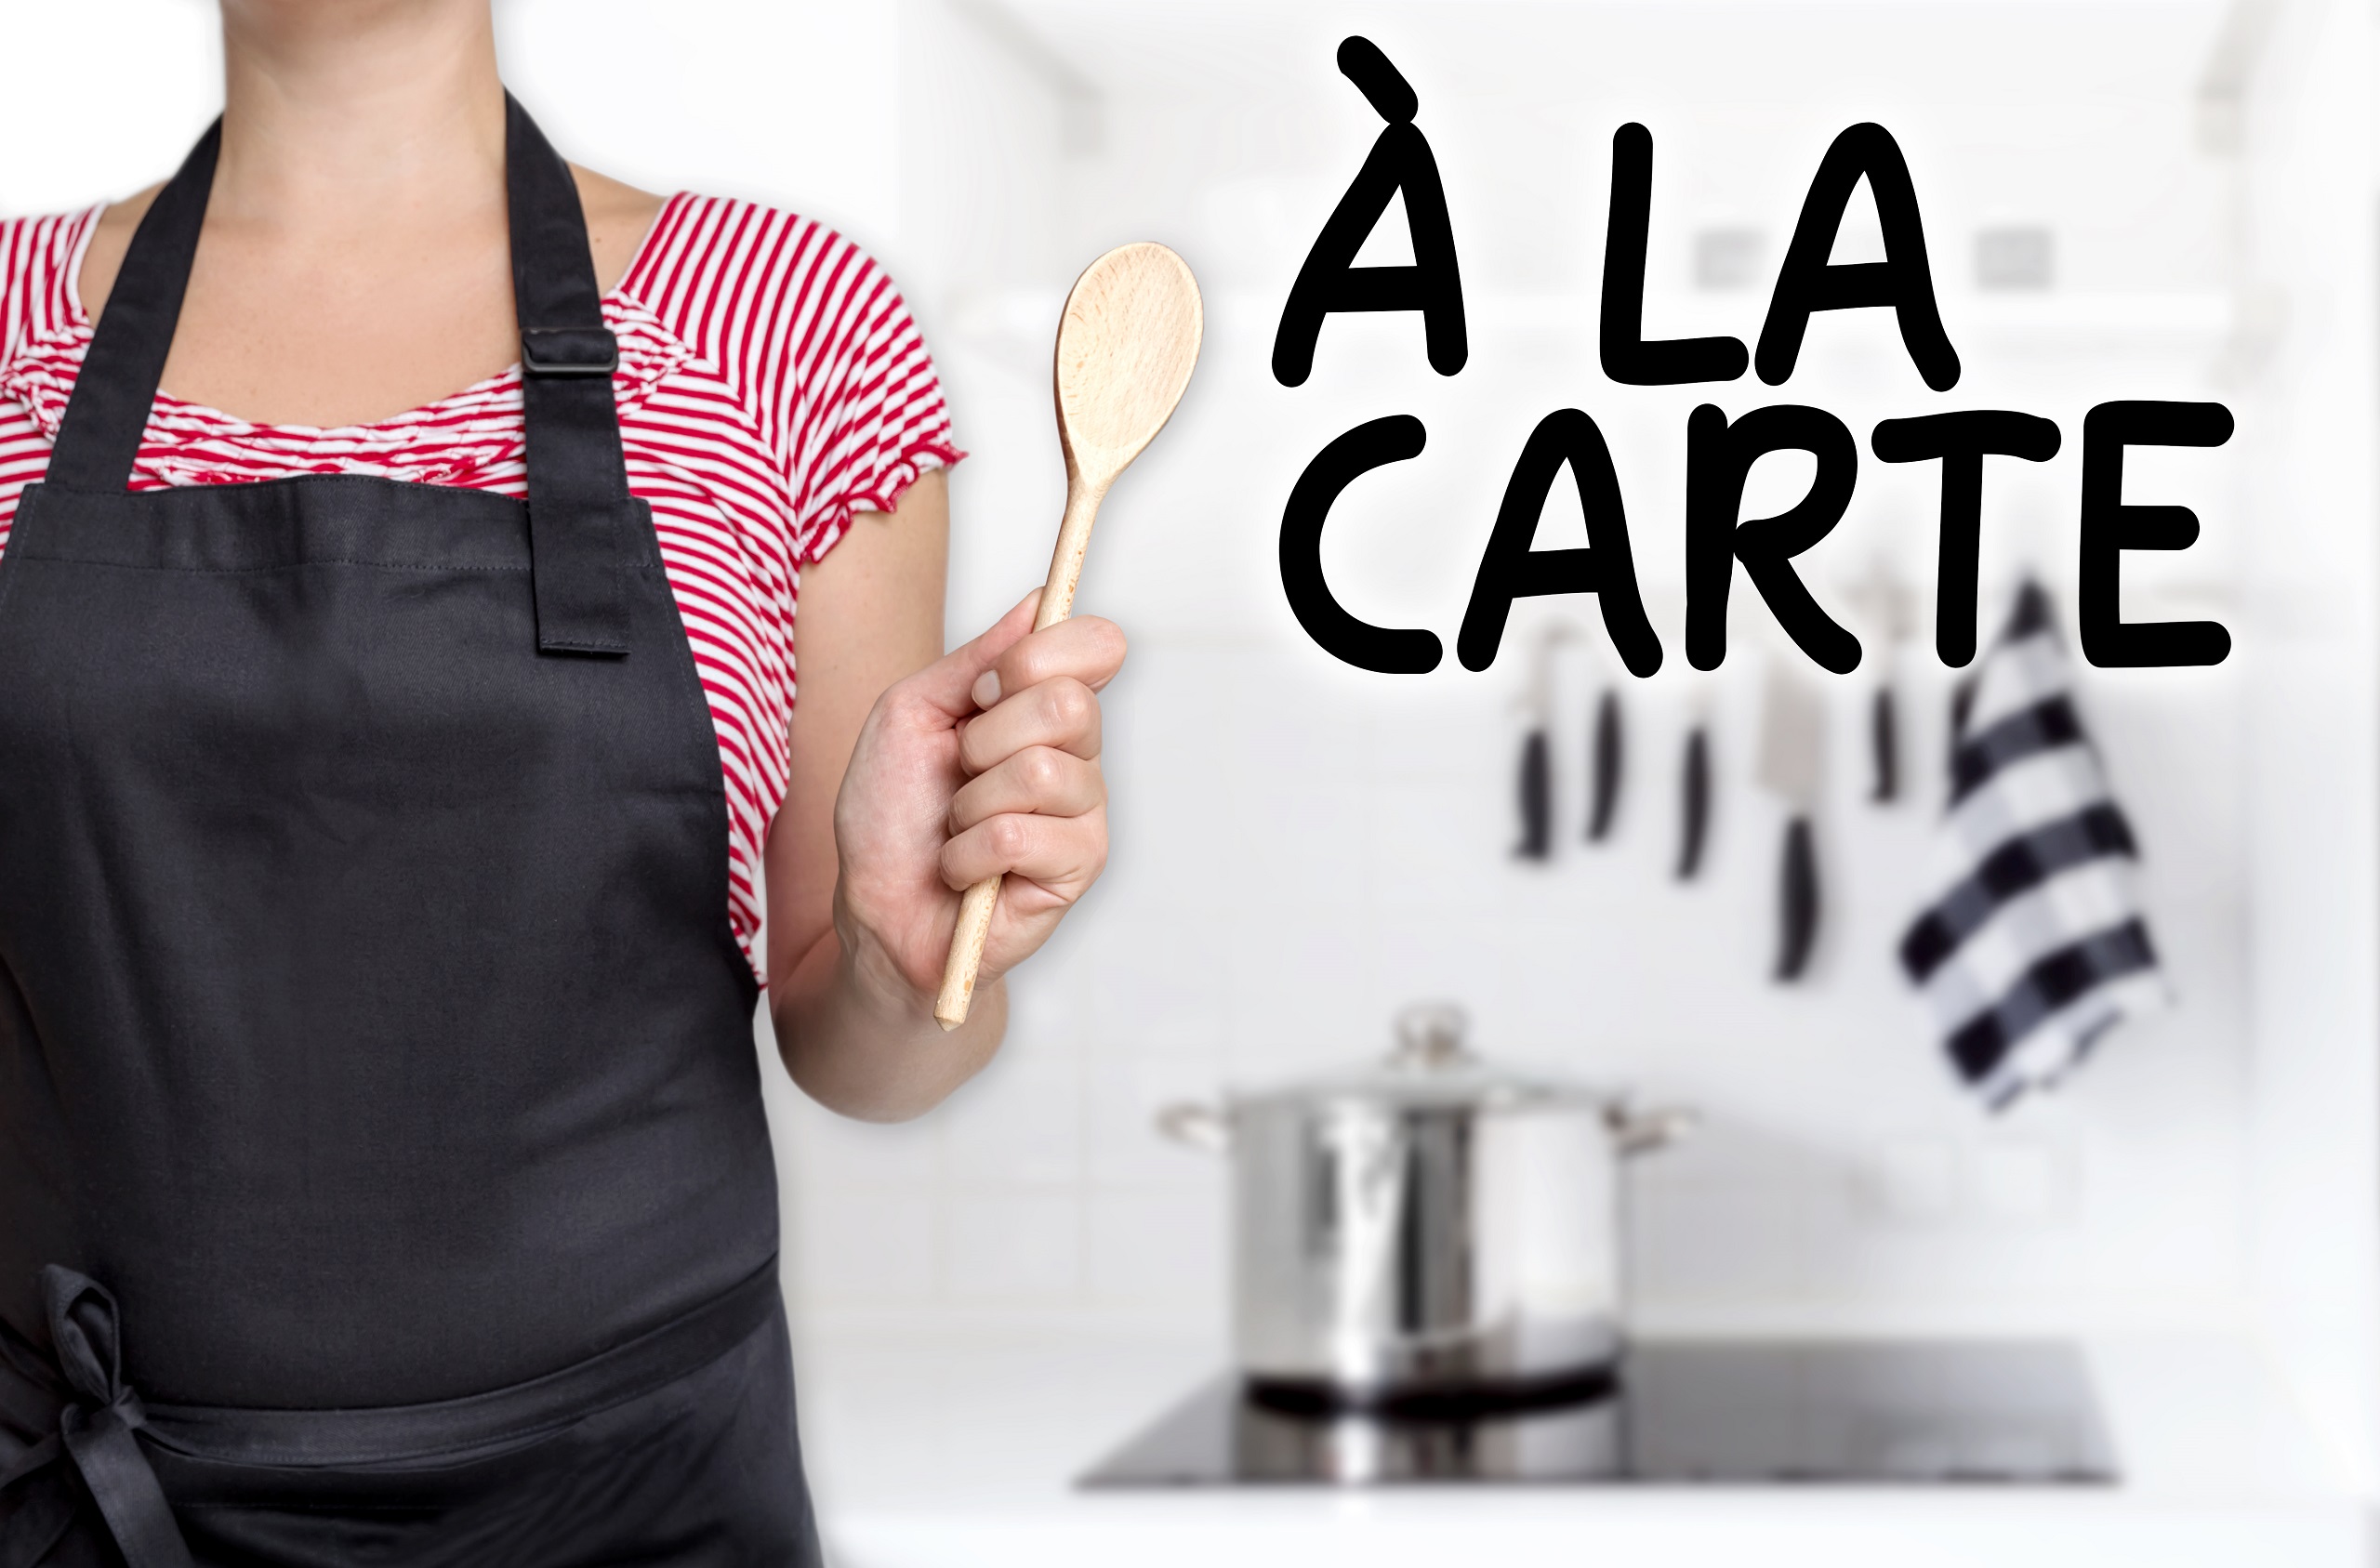 A female in a red and white short sleeved shirt wearing a black apron holding a wooden spoon angled towards the words "a la carte" with a kitchen background in a white setting.